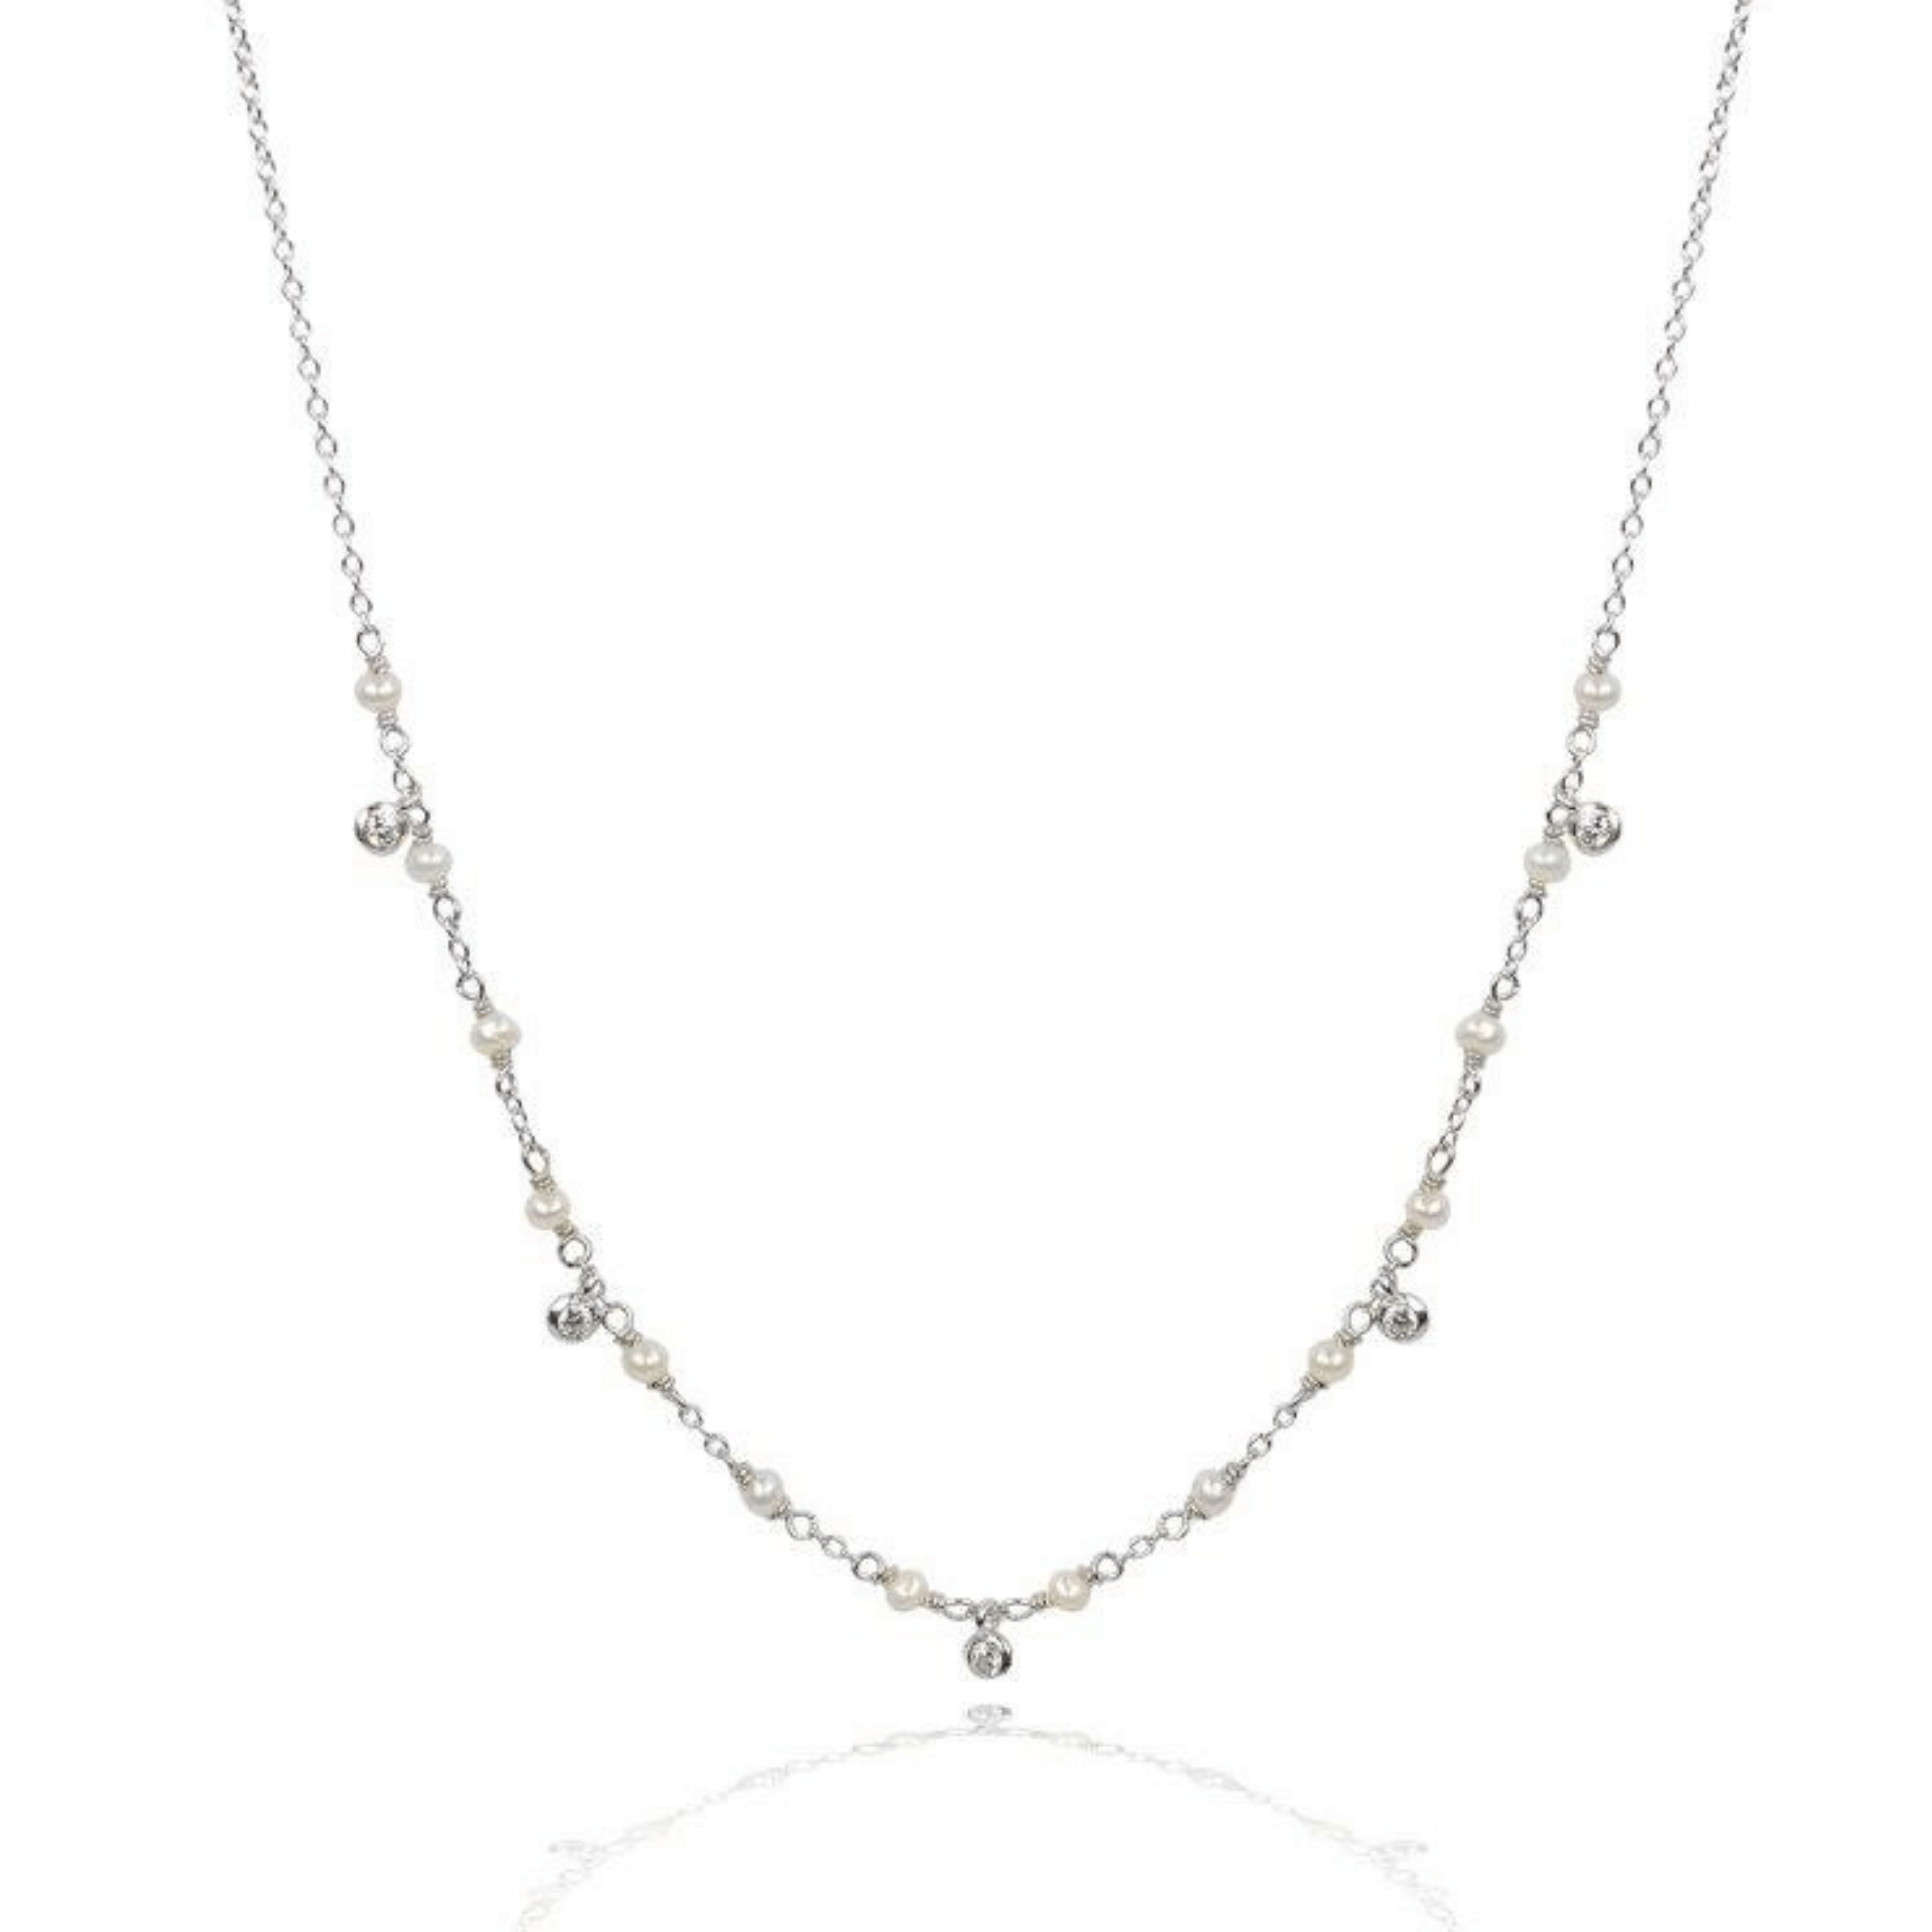 Cubic zirconia and pearl drop sterling silver  necklace